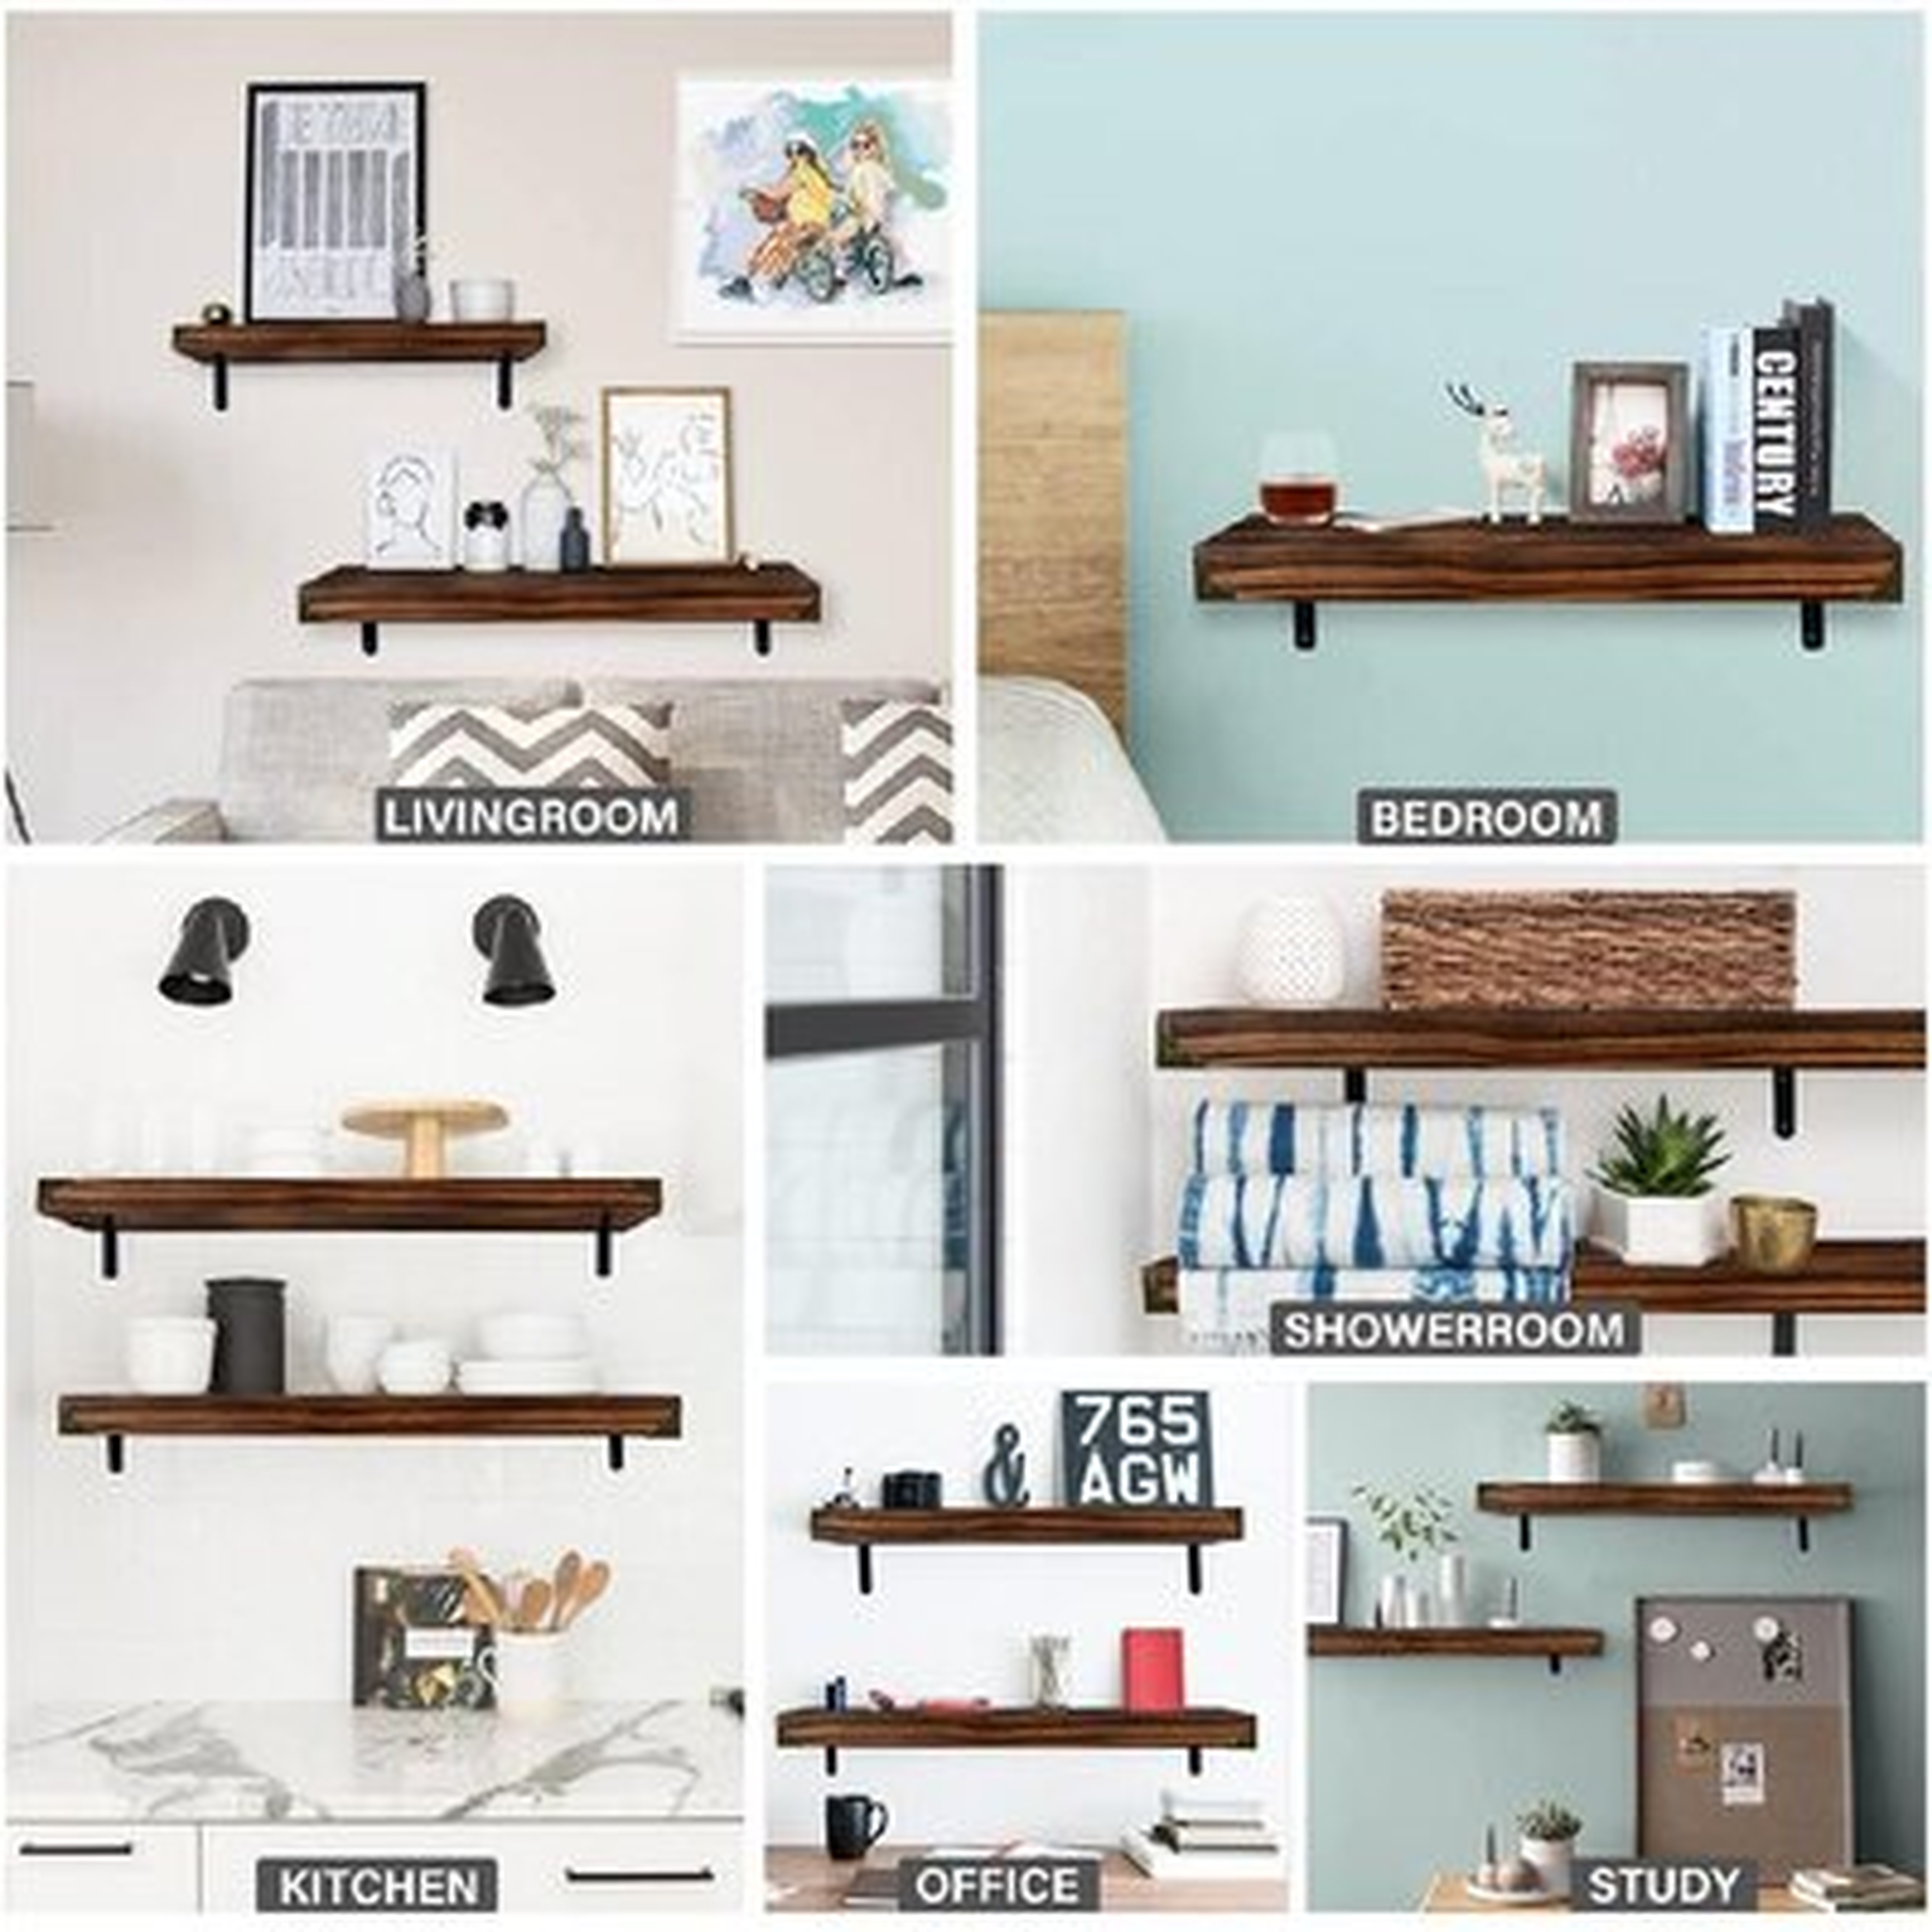 Floating Shelf Solid Wood Wall Shelves Long Thick Wide Rustic Wooden Storage Shelves With Bracket Wall Mounted Shelving Décor For Living Room Bedroom Laundry Room Kitchen - Wayfair